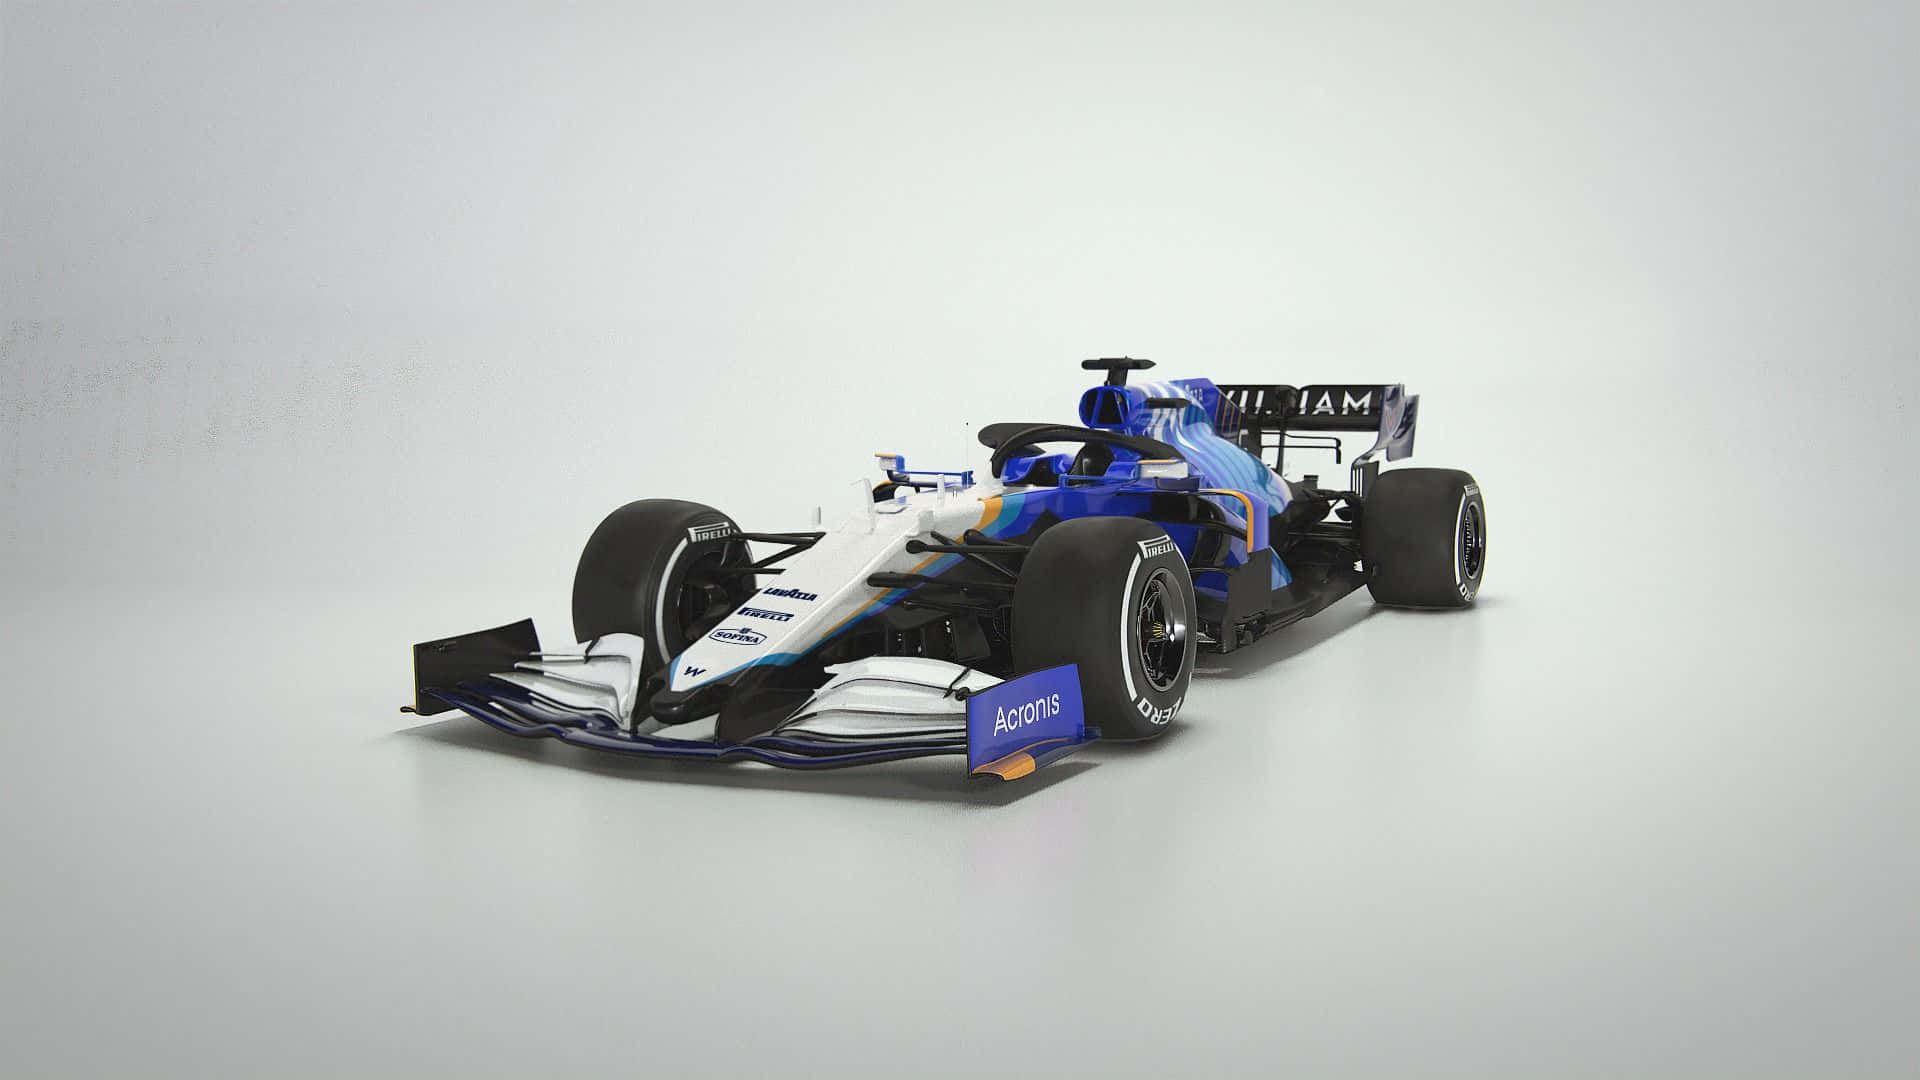 A Blue And White Racing Car On A White Background Wallpaper